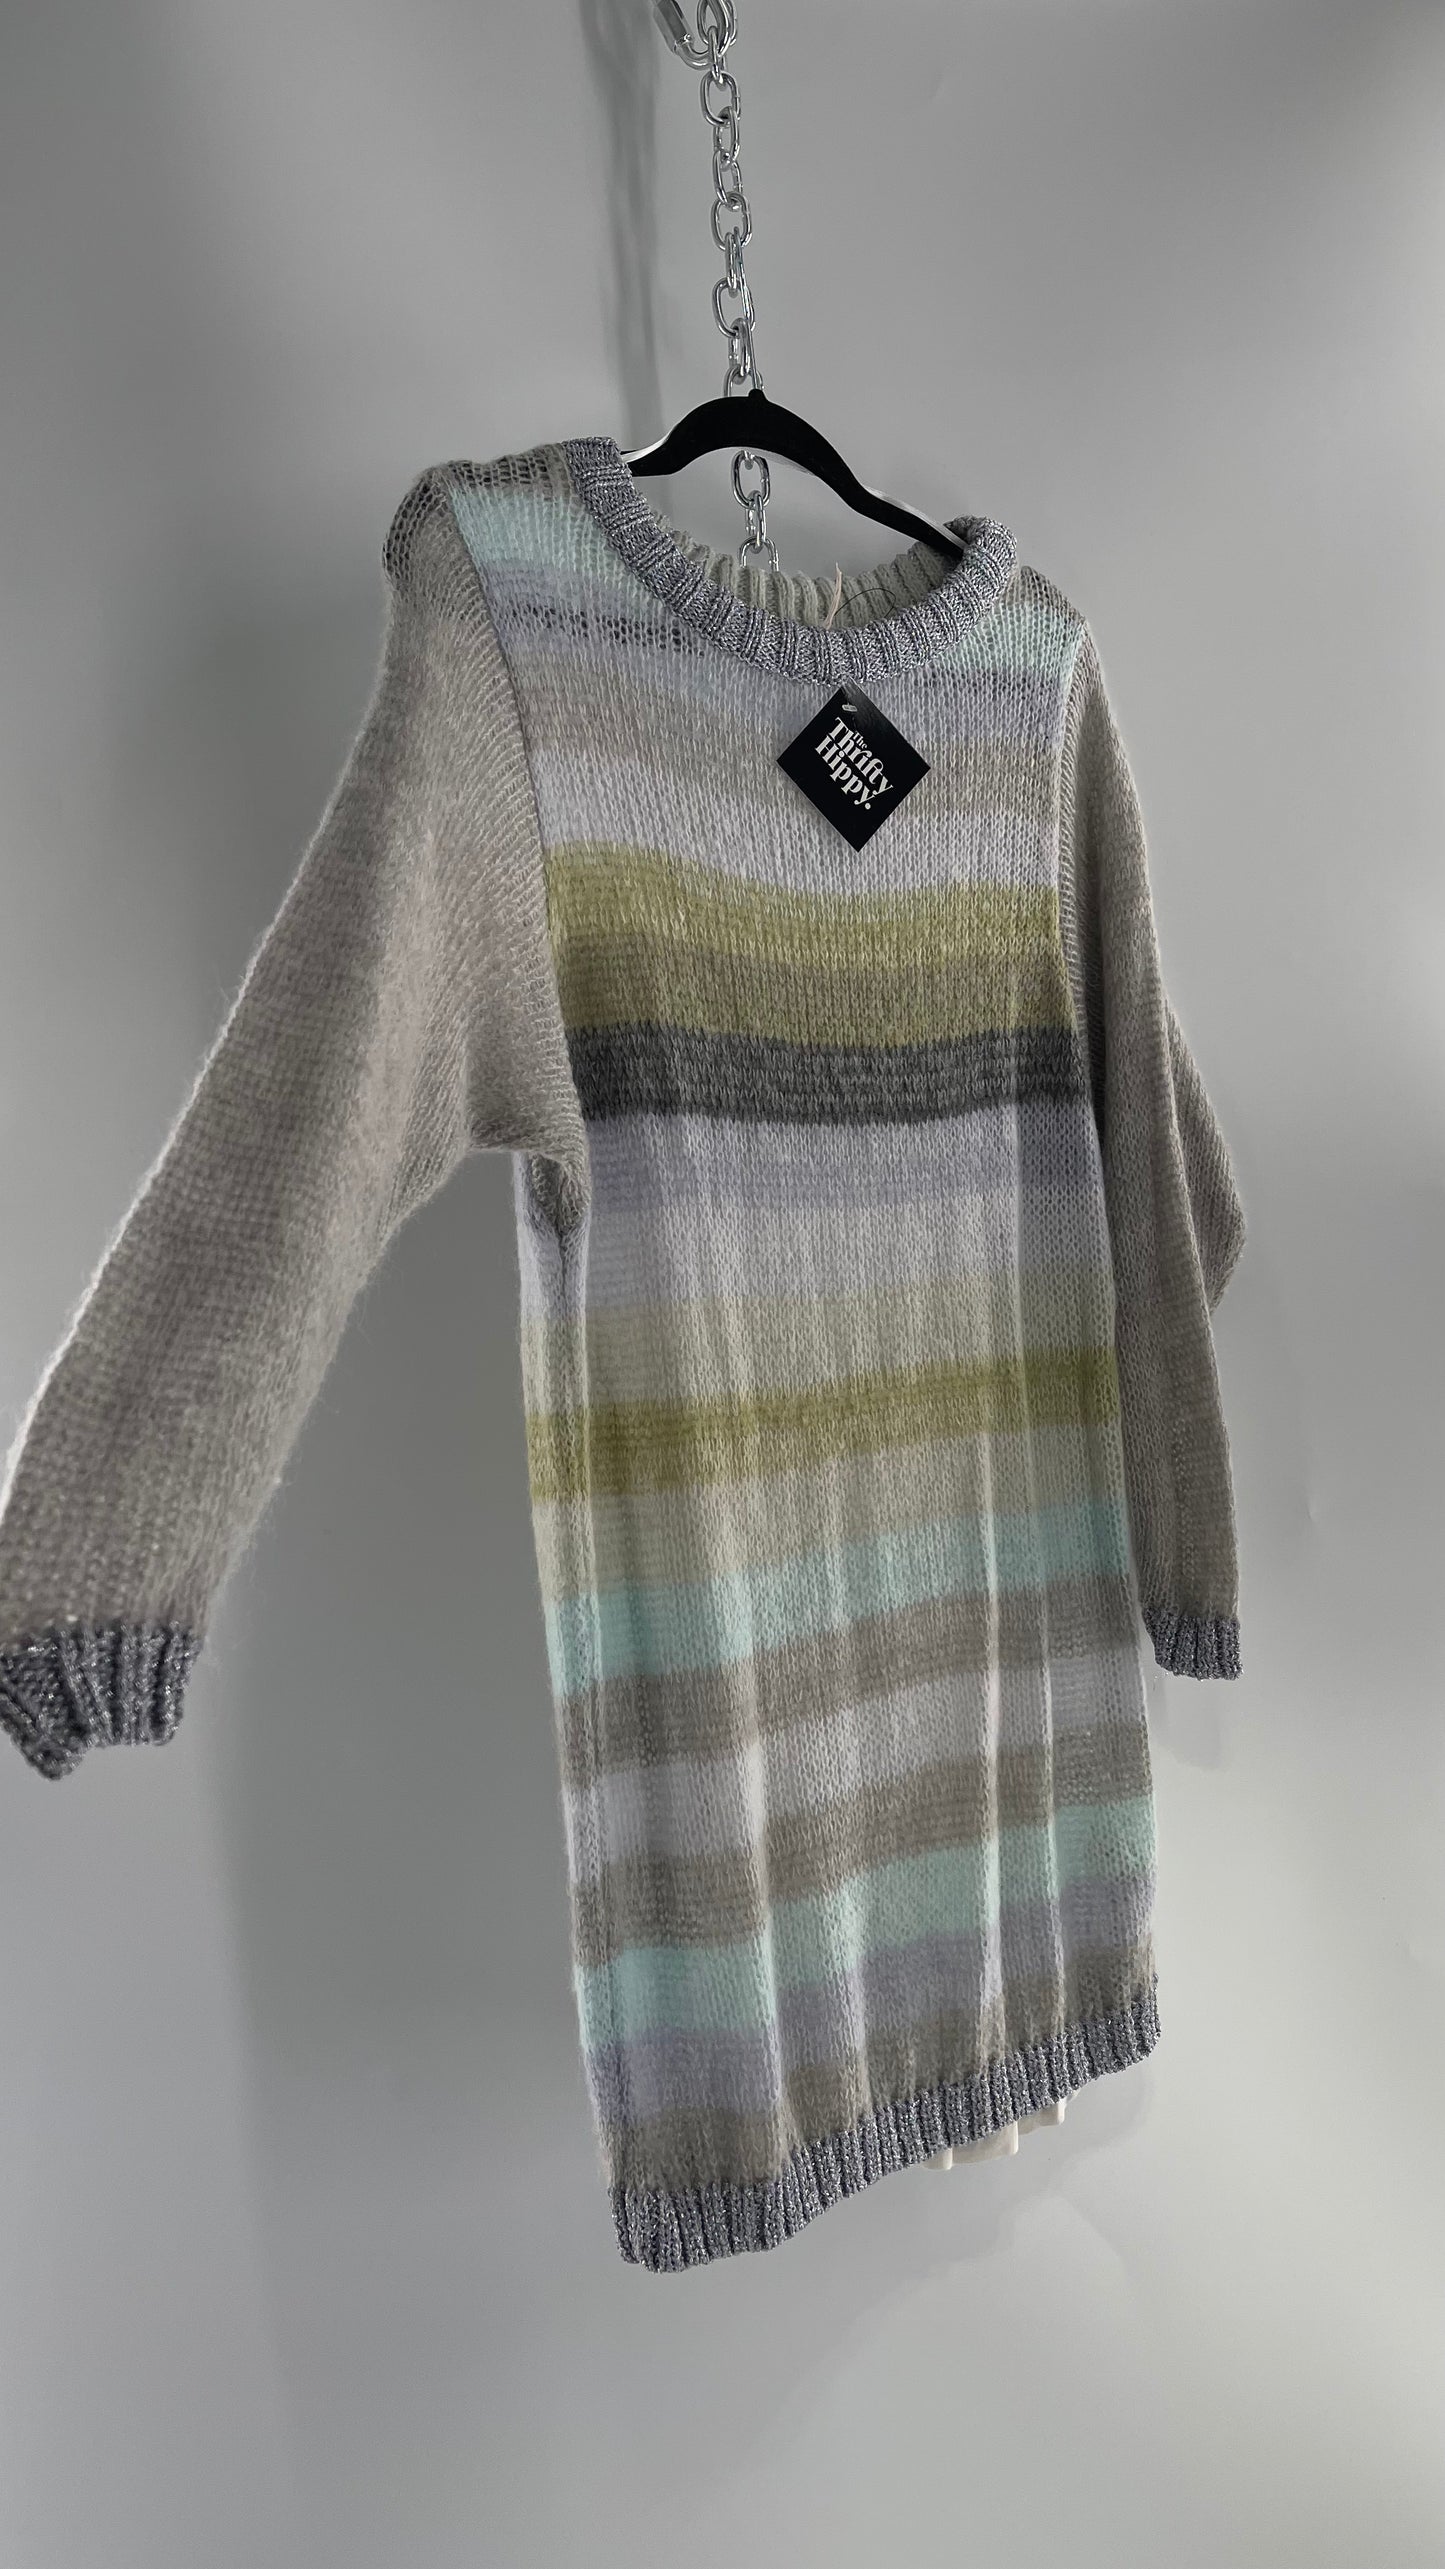 Free People Striped Sweater with Glitter Knit Cuffs and Collar (XS)